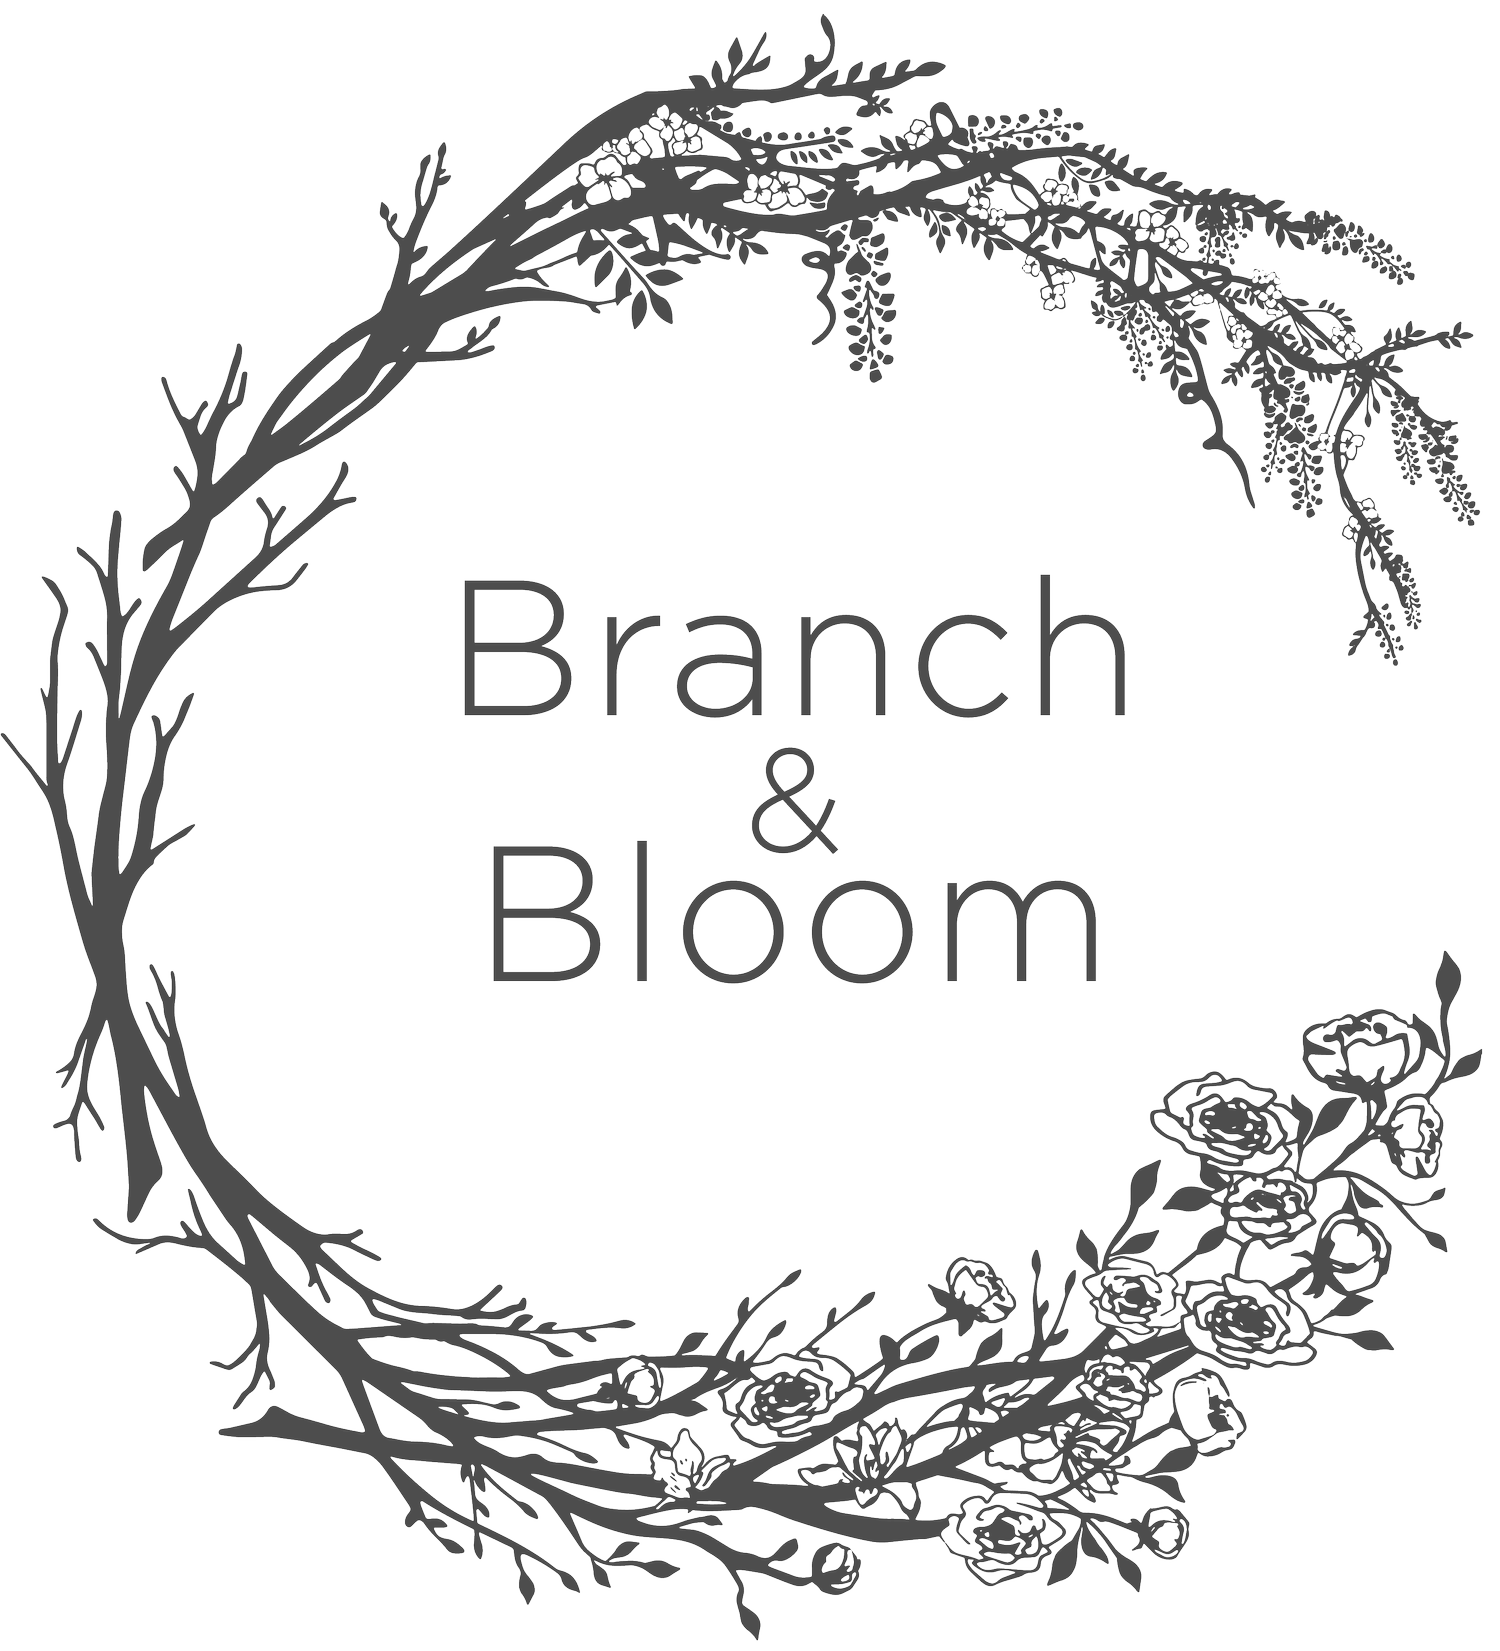 Branch and Bloom